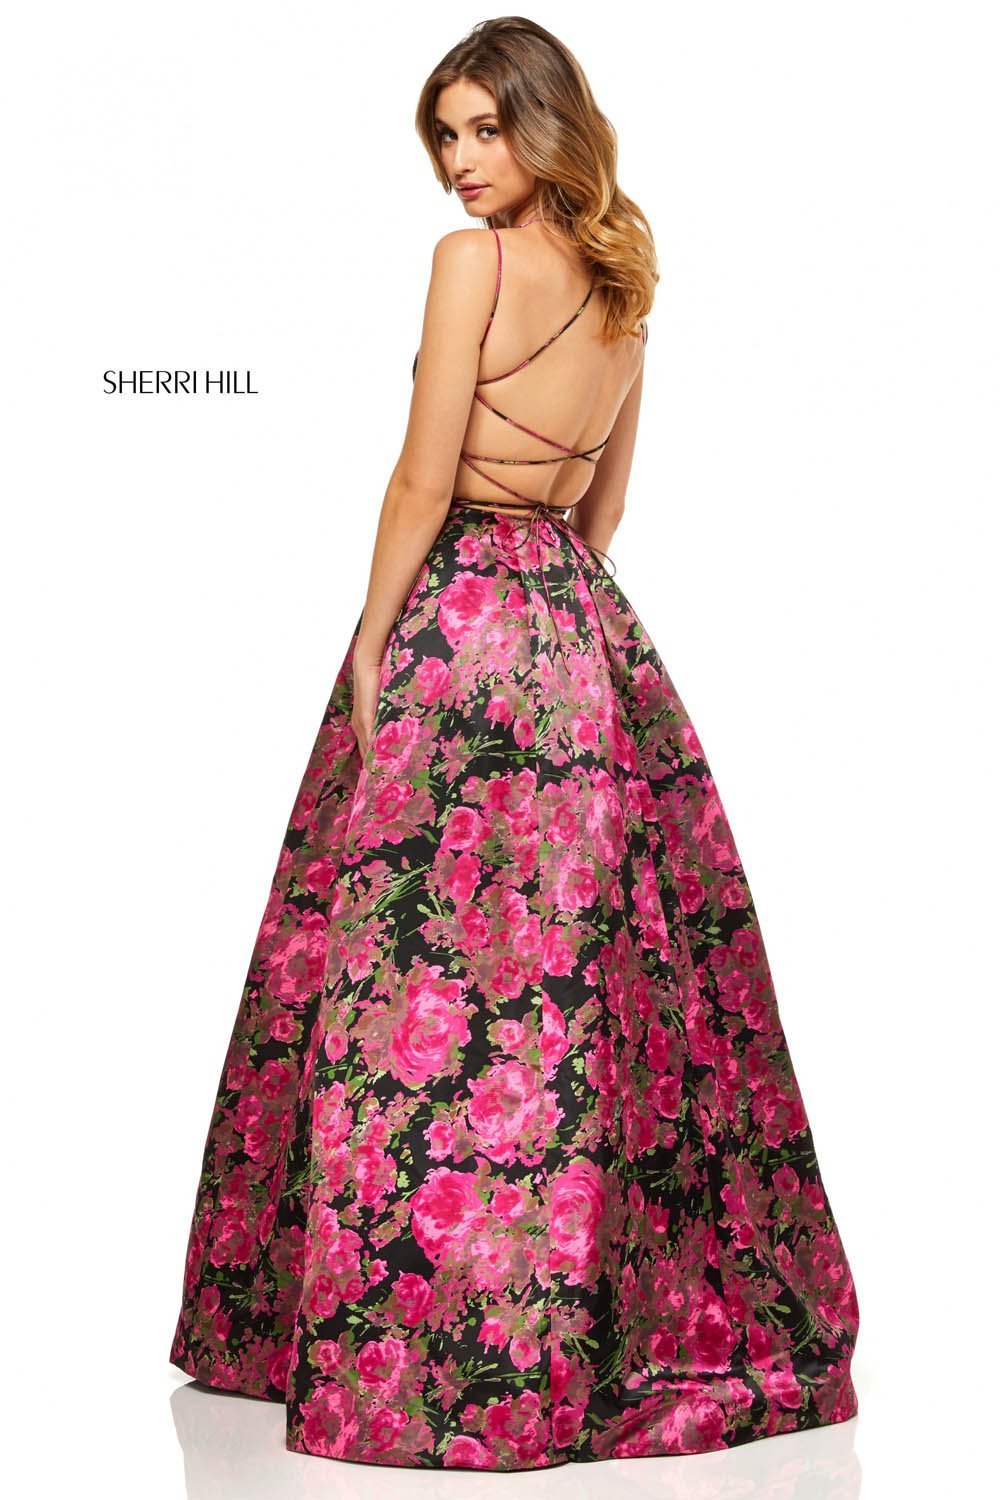 Sherri Hill 52627 dress images in these colors: Black Print, Ivory Print.